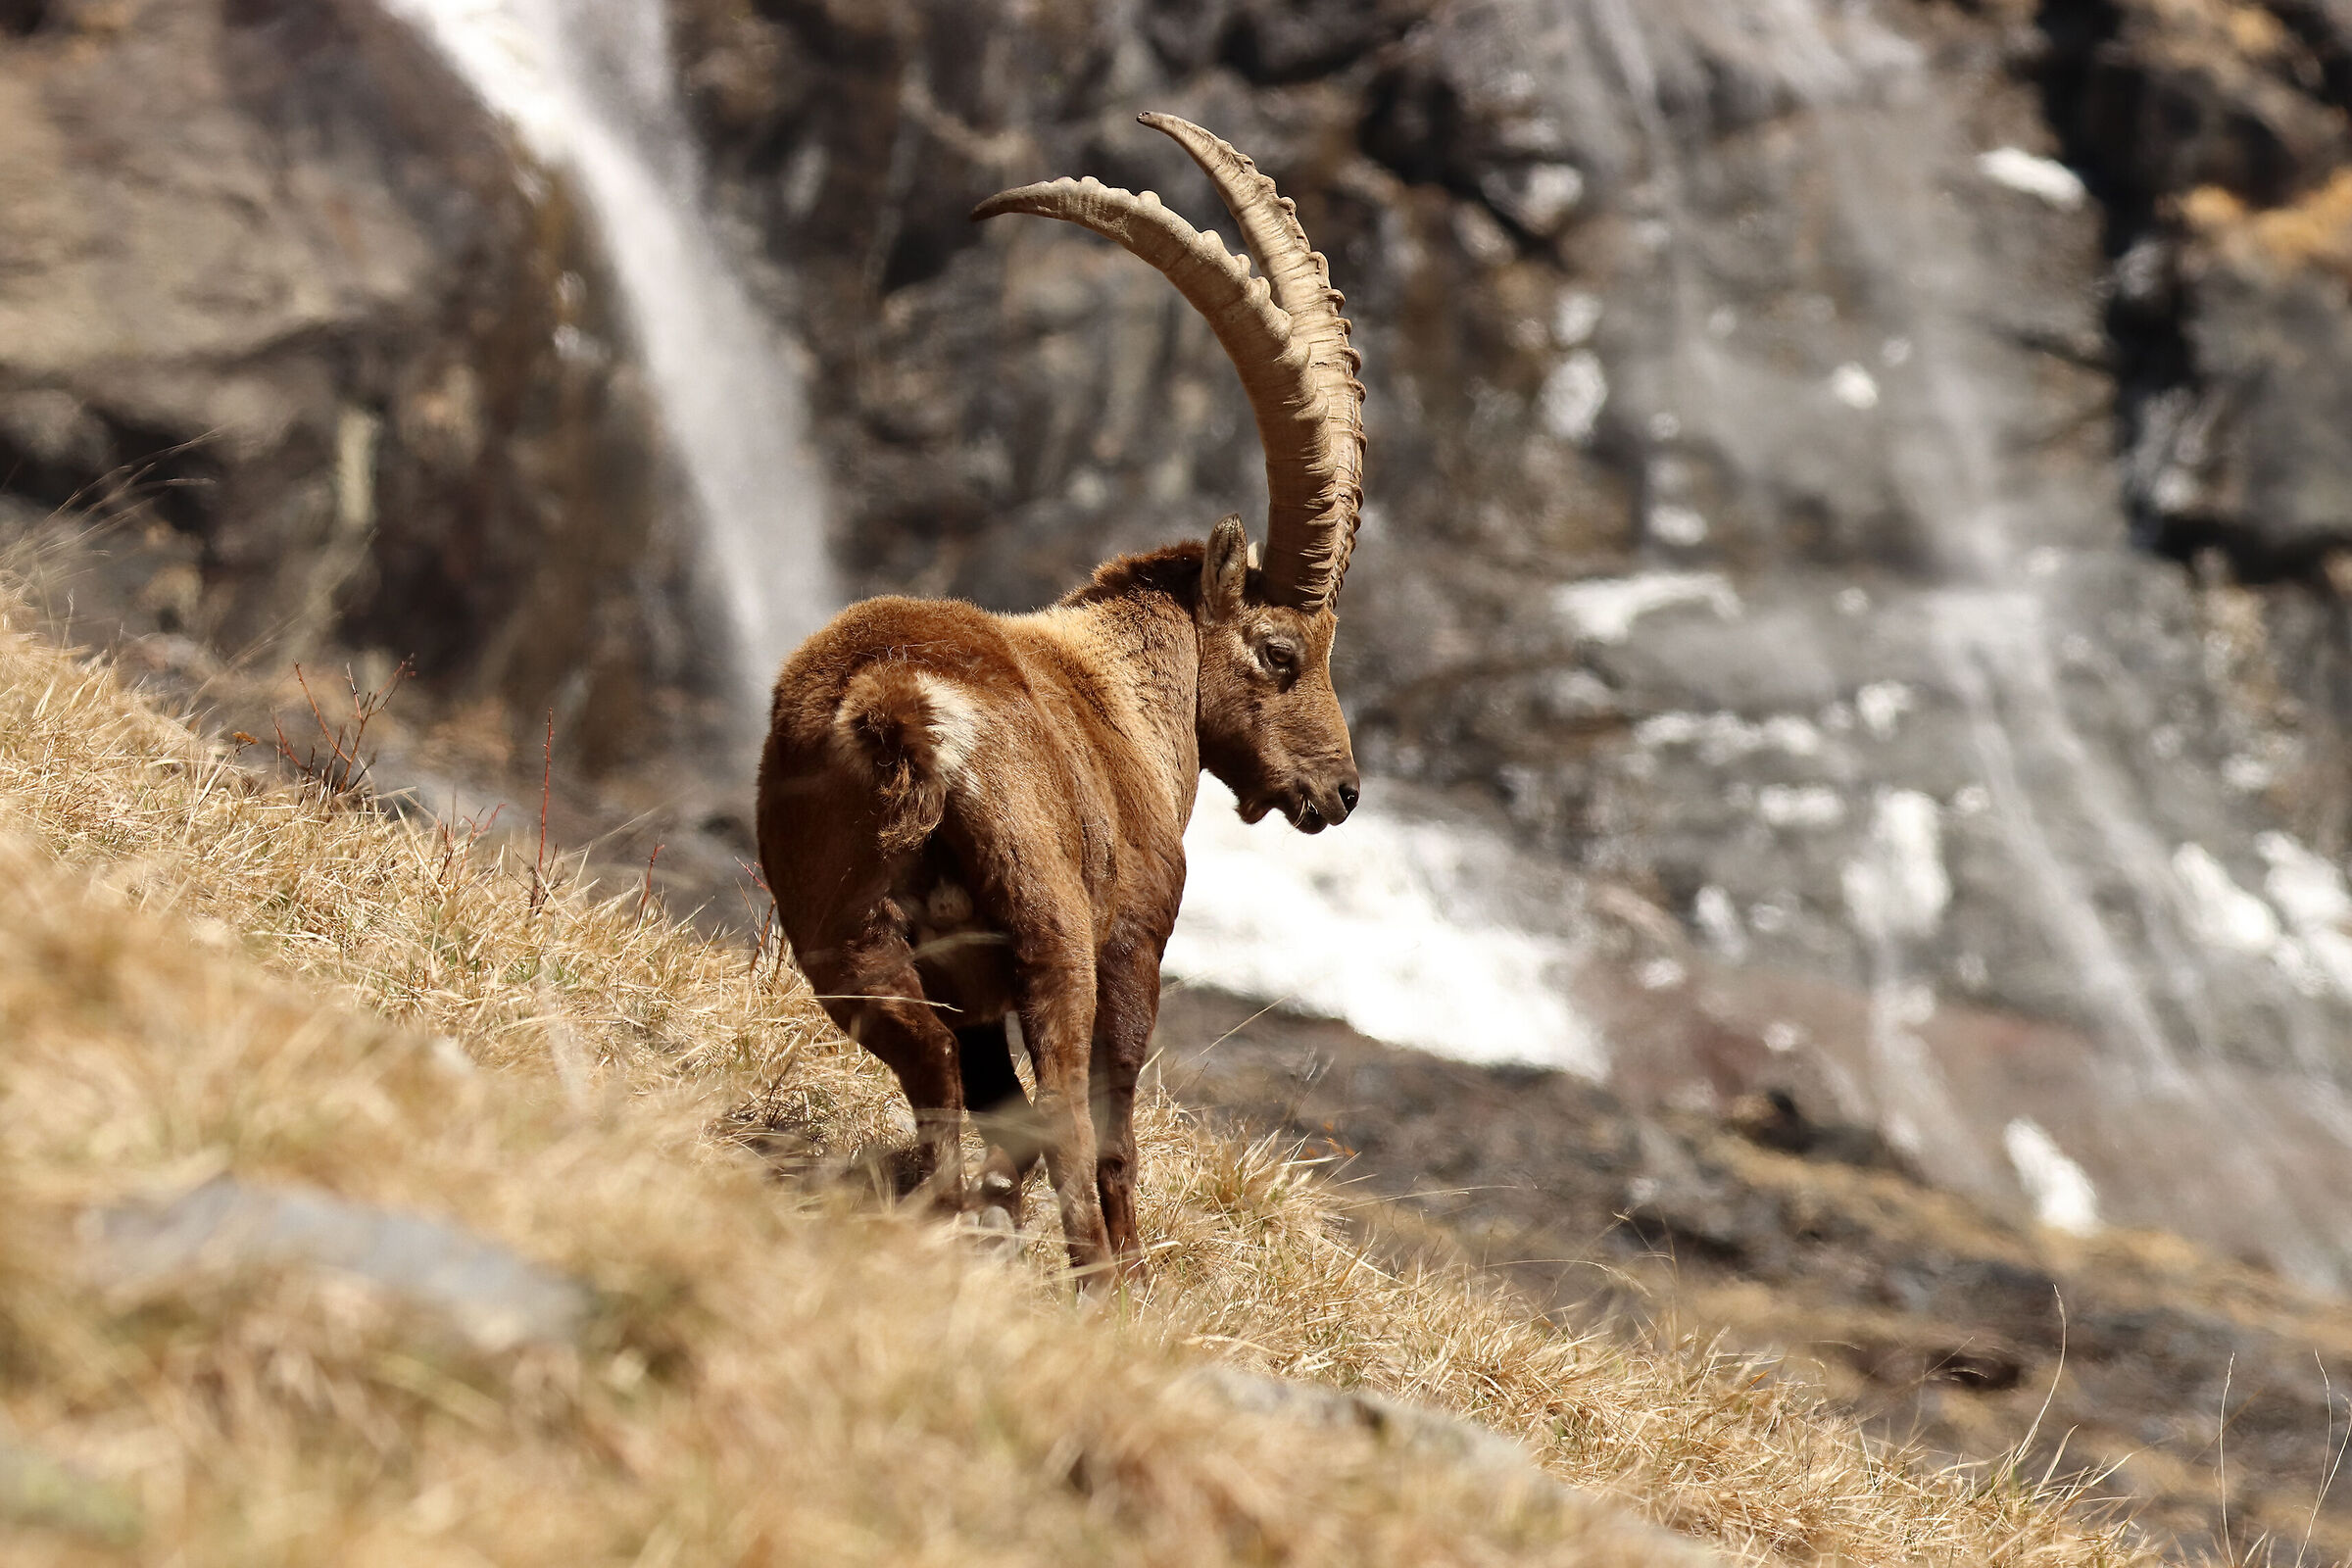 ibex at the waterfall...